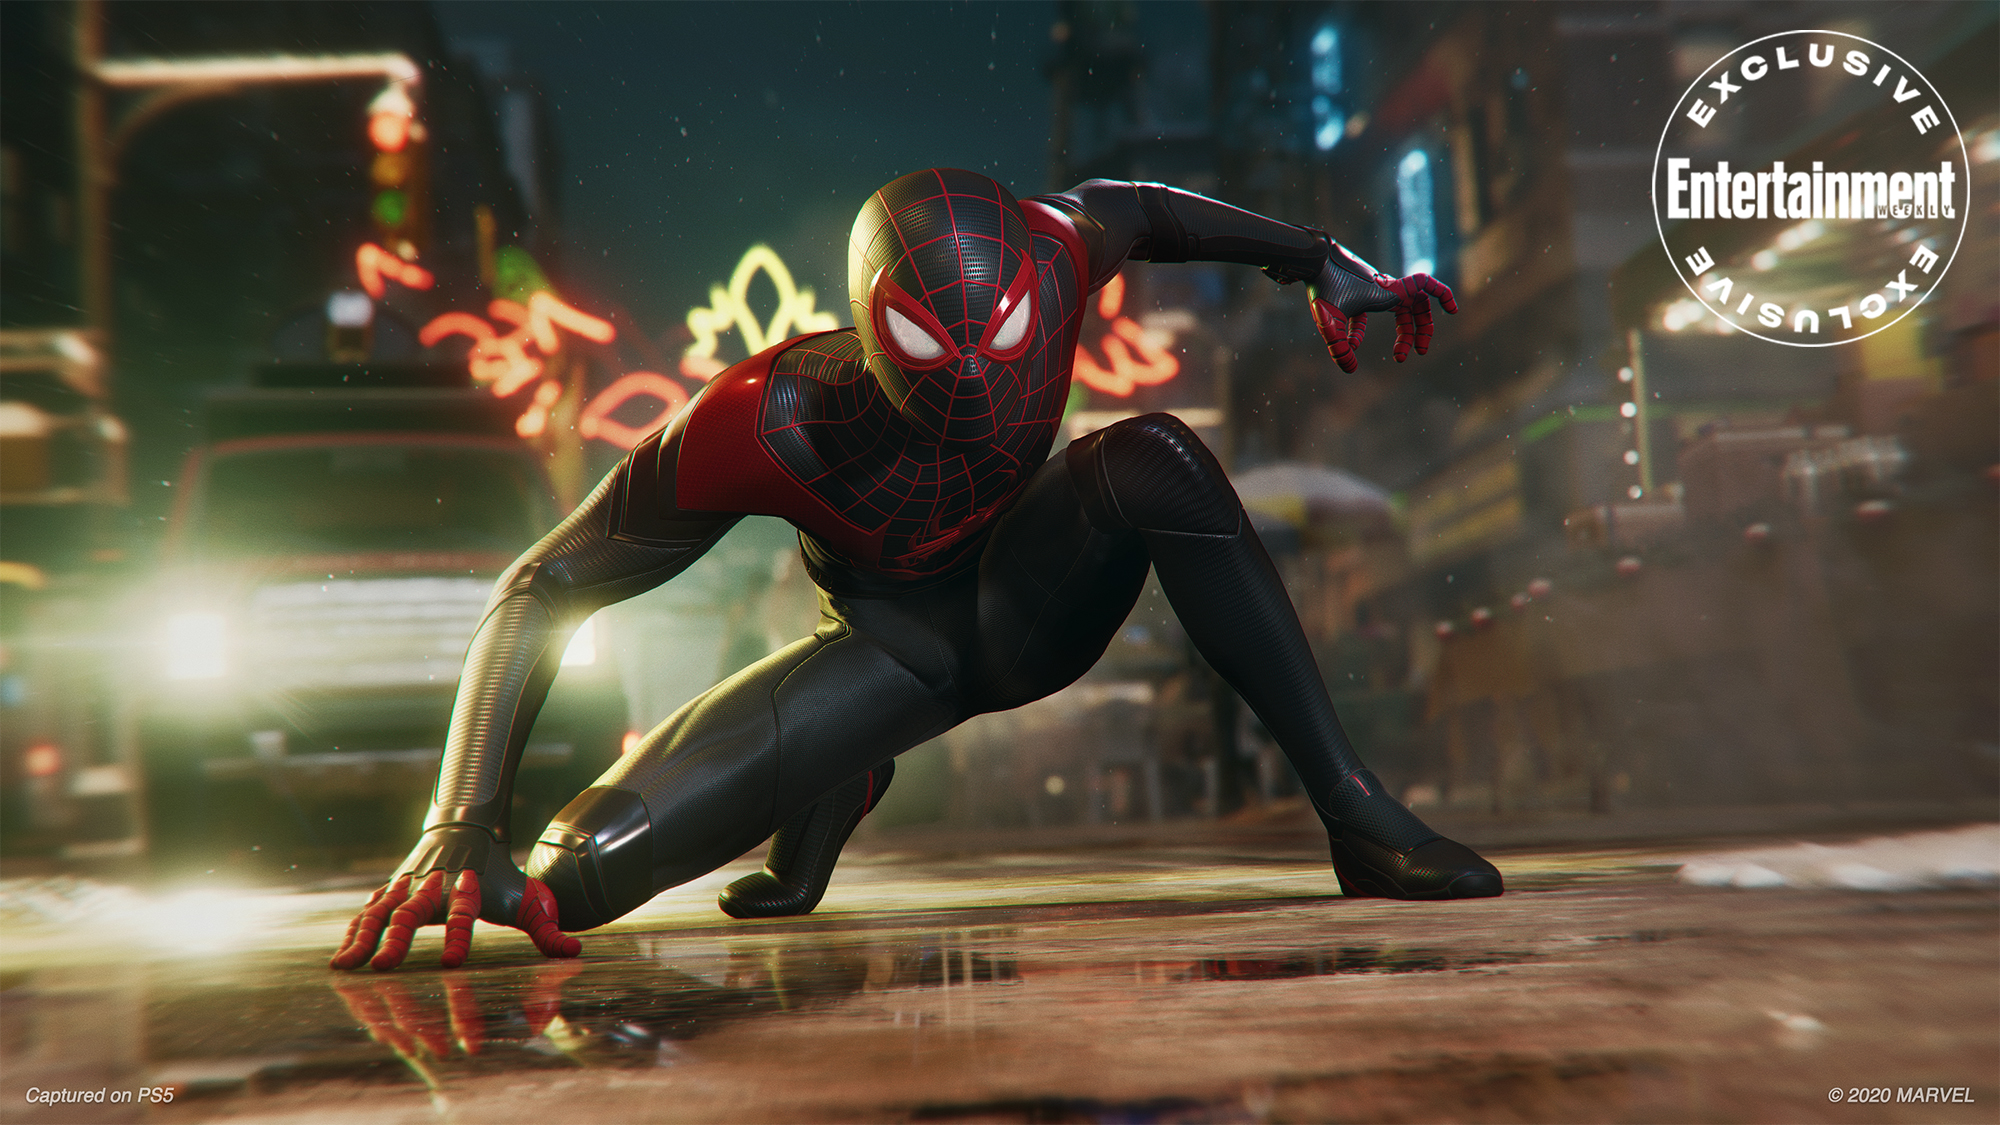 Which Spider-Man is Miles Morales?